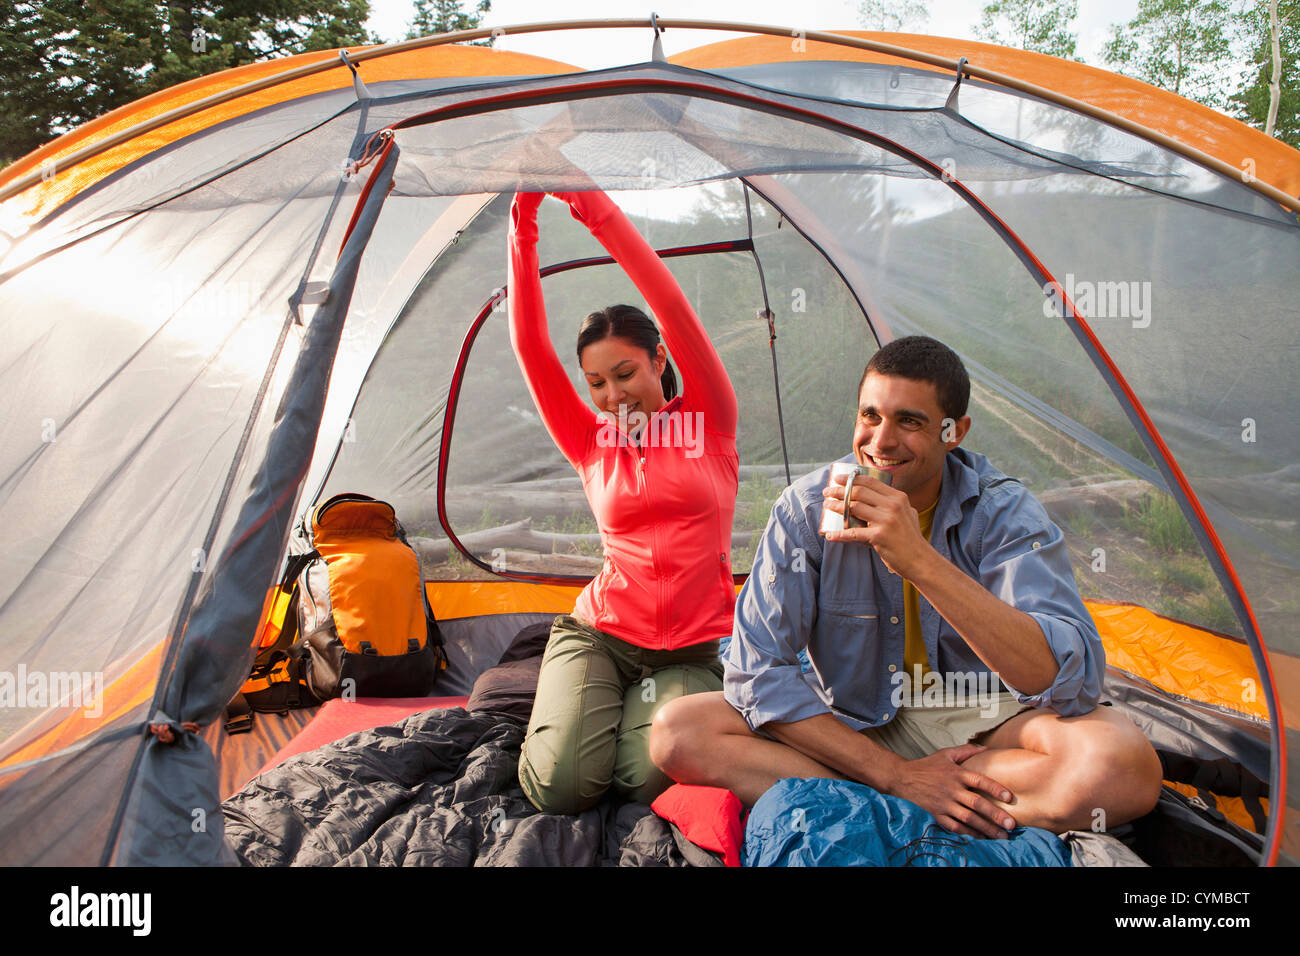 Couple sitting in tent Banque D'Images